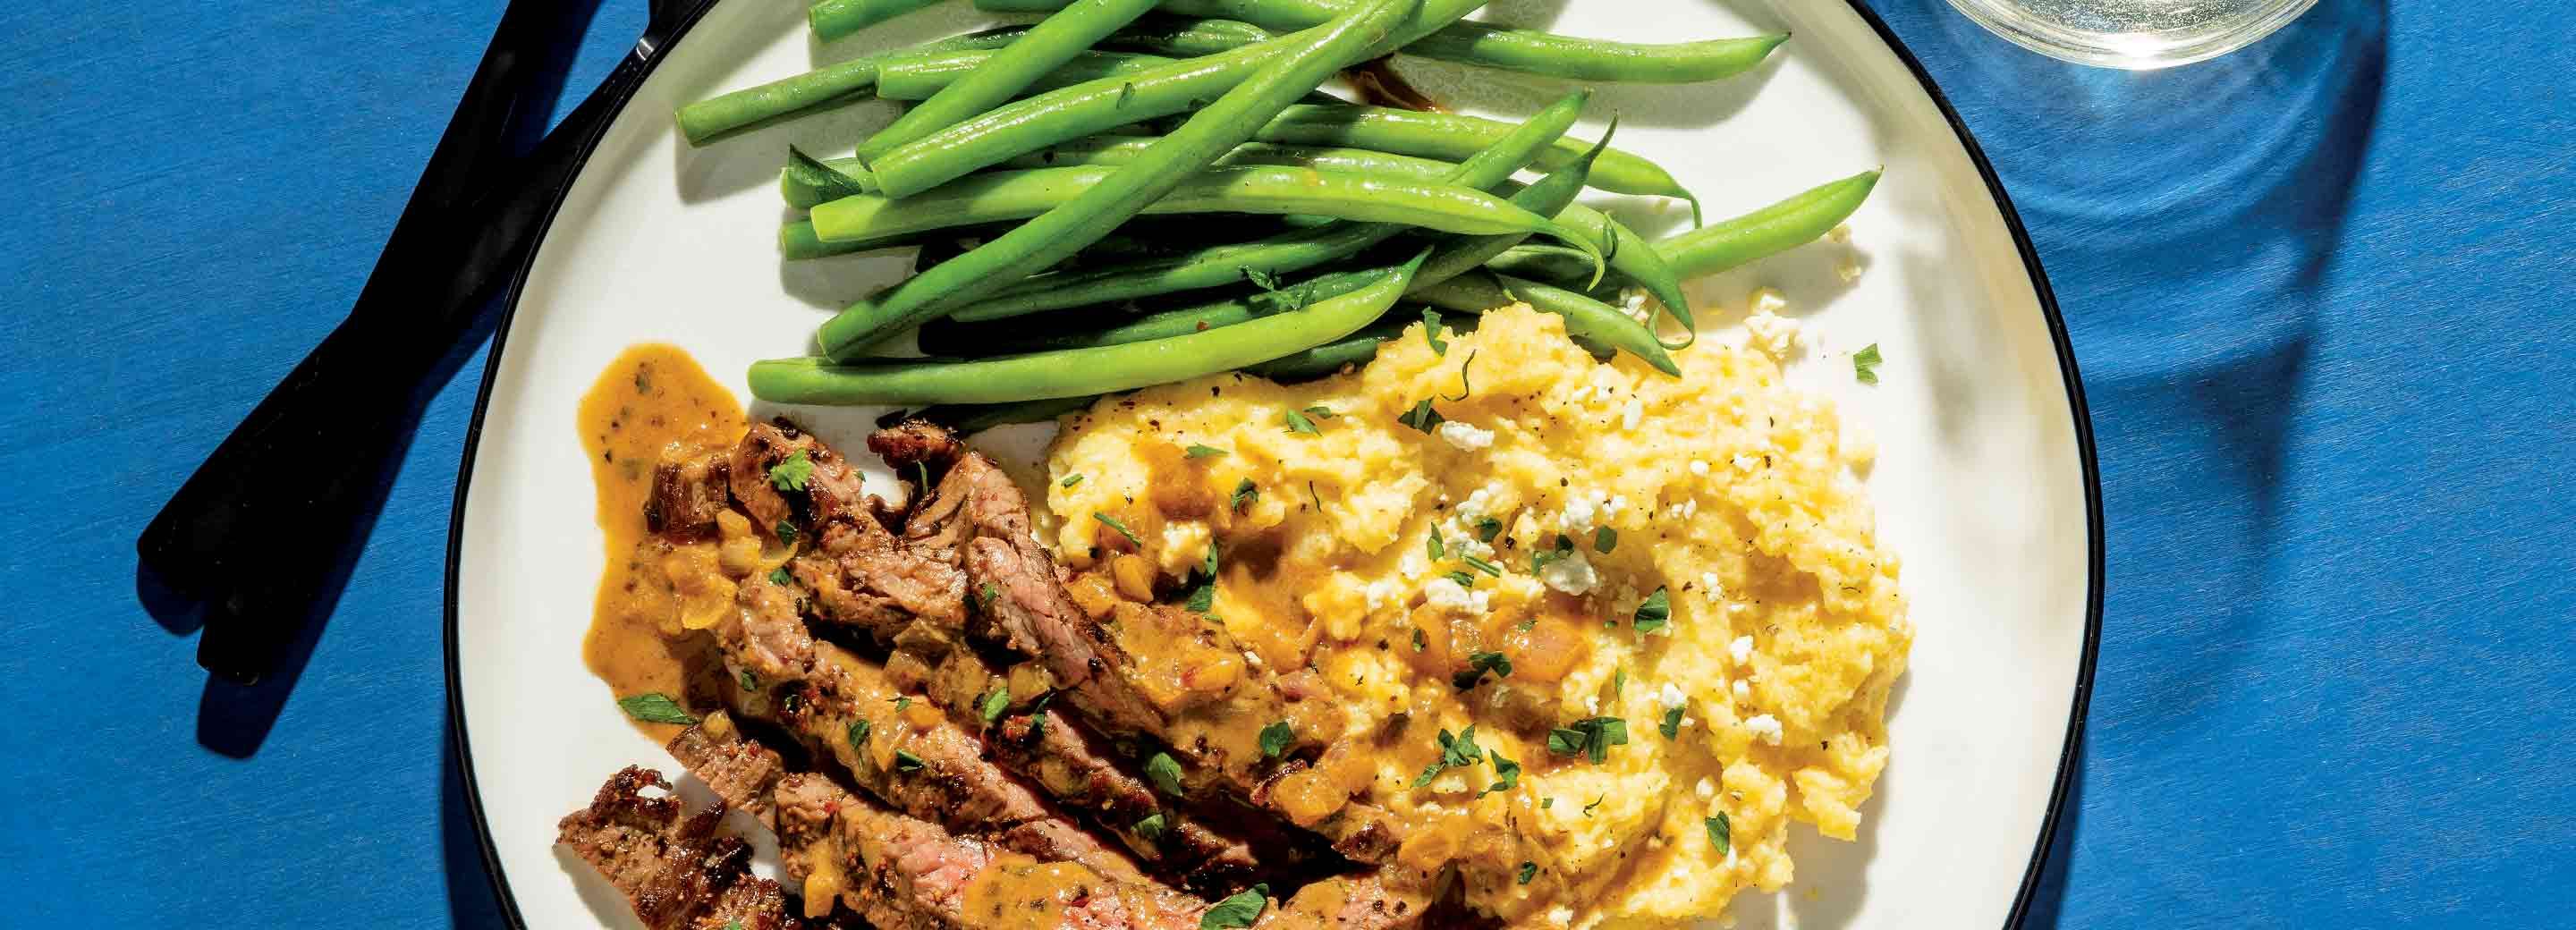 Steakhouse Dinner with Blue Cheese Polenta